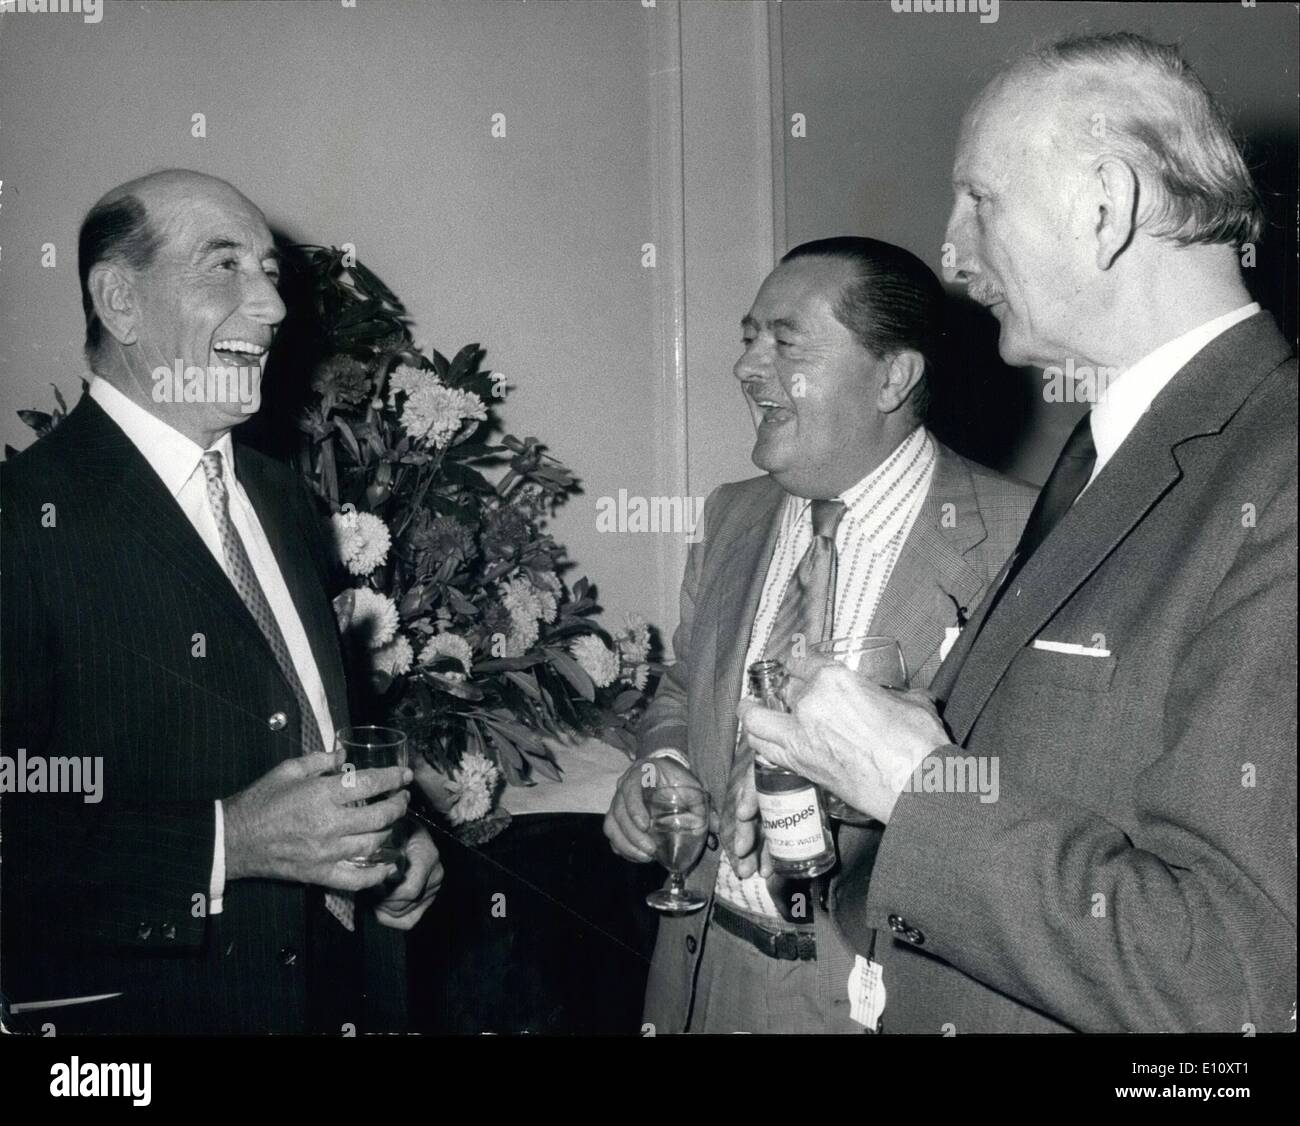 May 31, 1974 - May 31st, 1974 Derby luncheon at Kempton Park. The Annual Press Club Derby luncheon was held today at Kempton Park racecourse. Keystone Photo Shows: Enjoying a Ã¢â‚¬Ëœjoke' at the luncheon today are (L to R): Captain Ryan Price, trainer of Derby entrant Ã¢â‚¬ËœGiocometti; Sir William Barnetson, President of the London Press Club and Mr. Frank Coven, Director of United Race Courses. Stock Photo